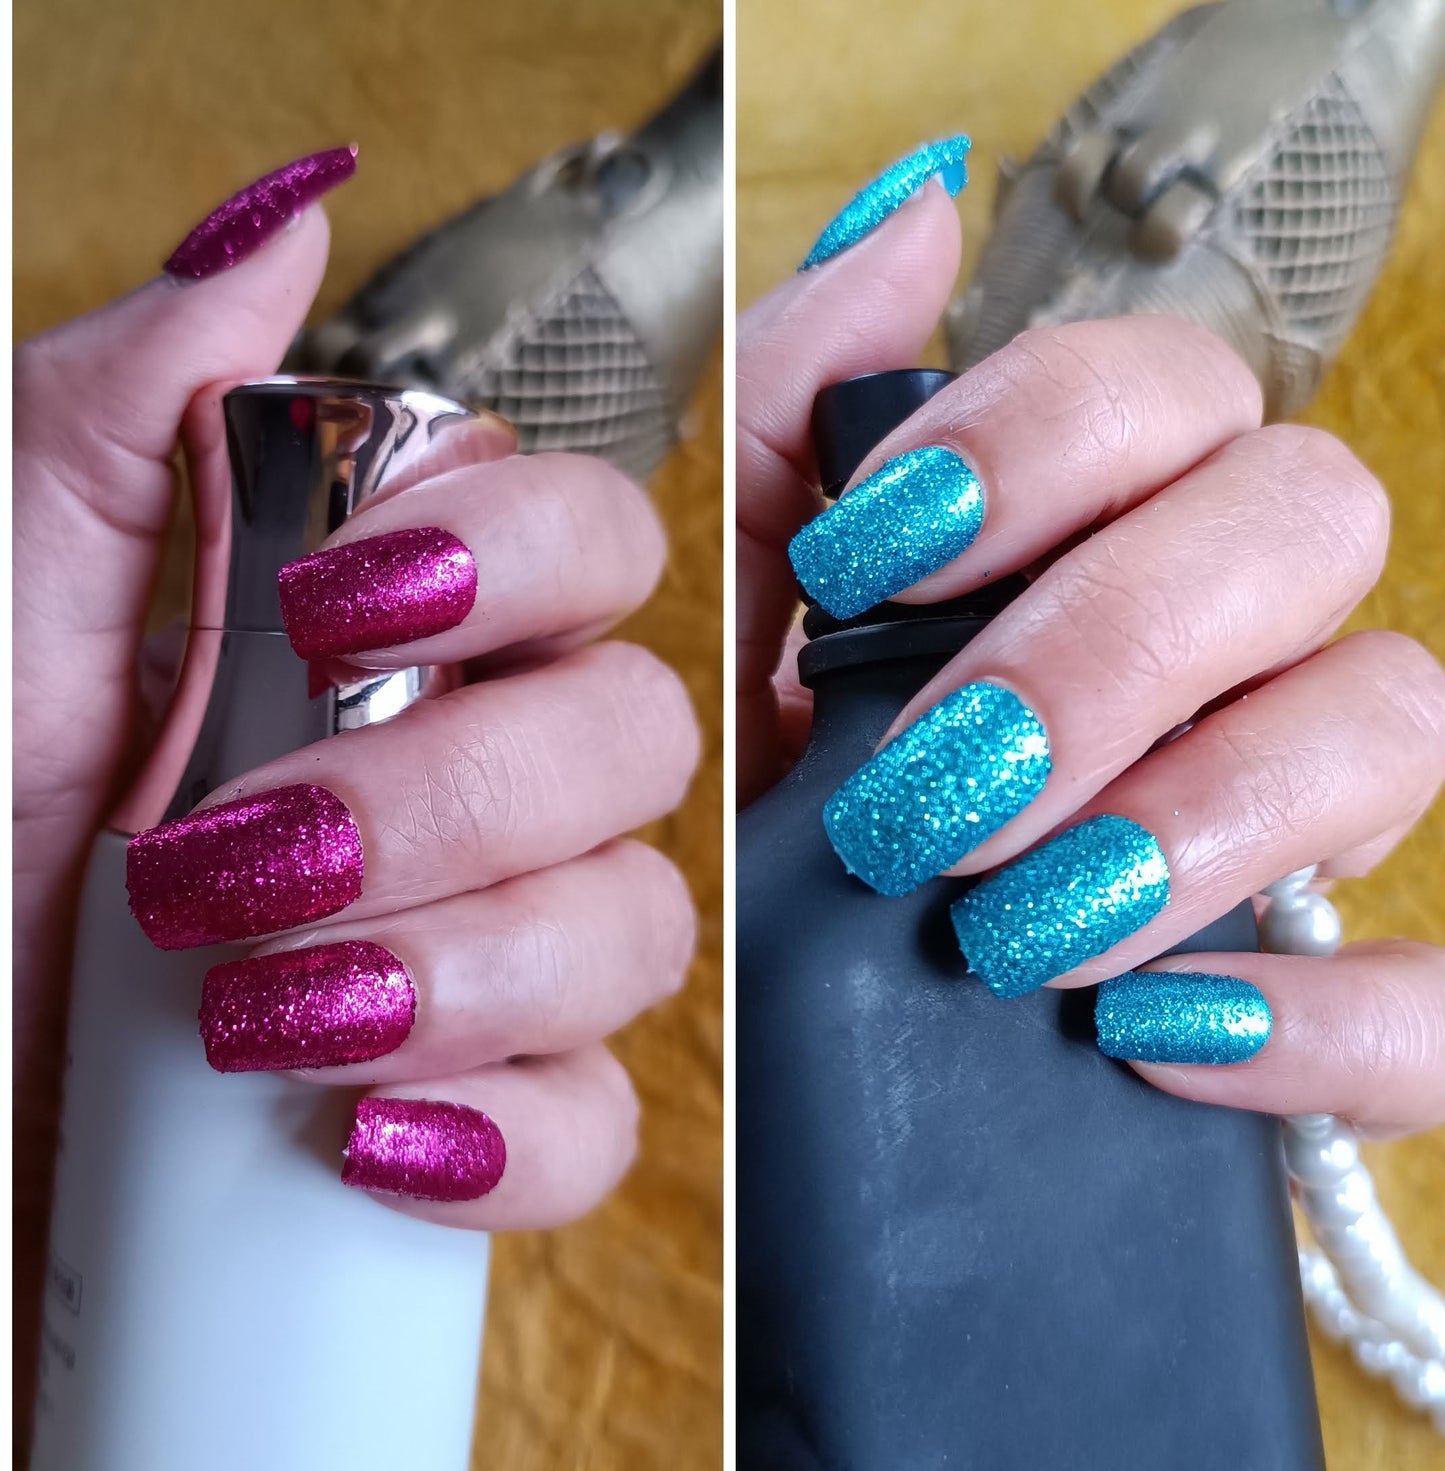 Combo of Acrylic/ Press-on Designer Nails with Glue Tabs  | Artificial Nails Under 200  - Box Shaped Magenta Shimmer-Teal Shimmer